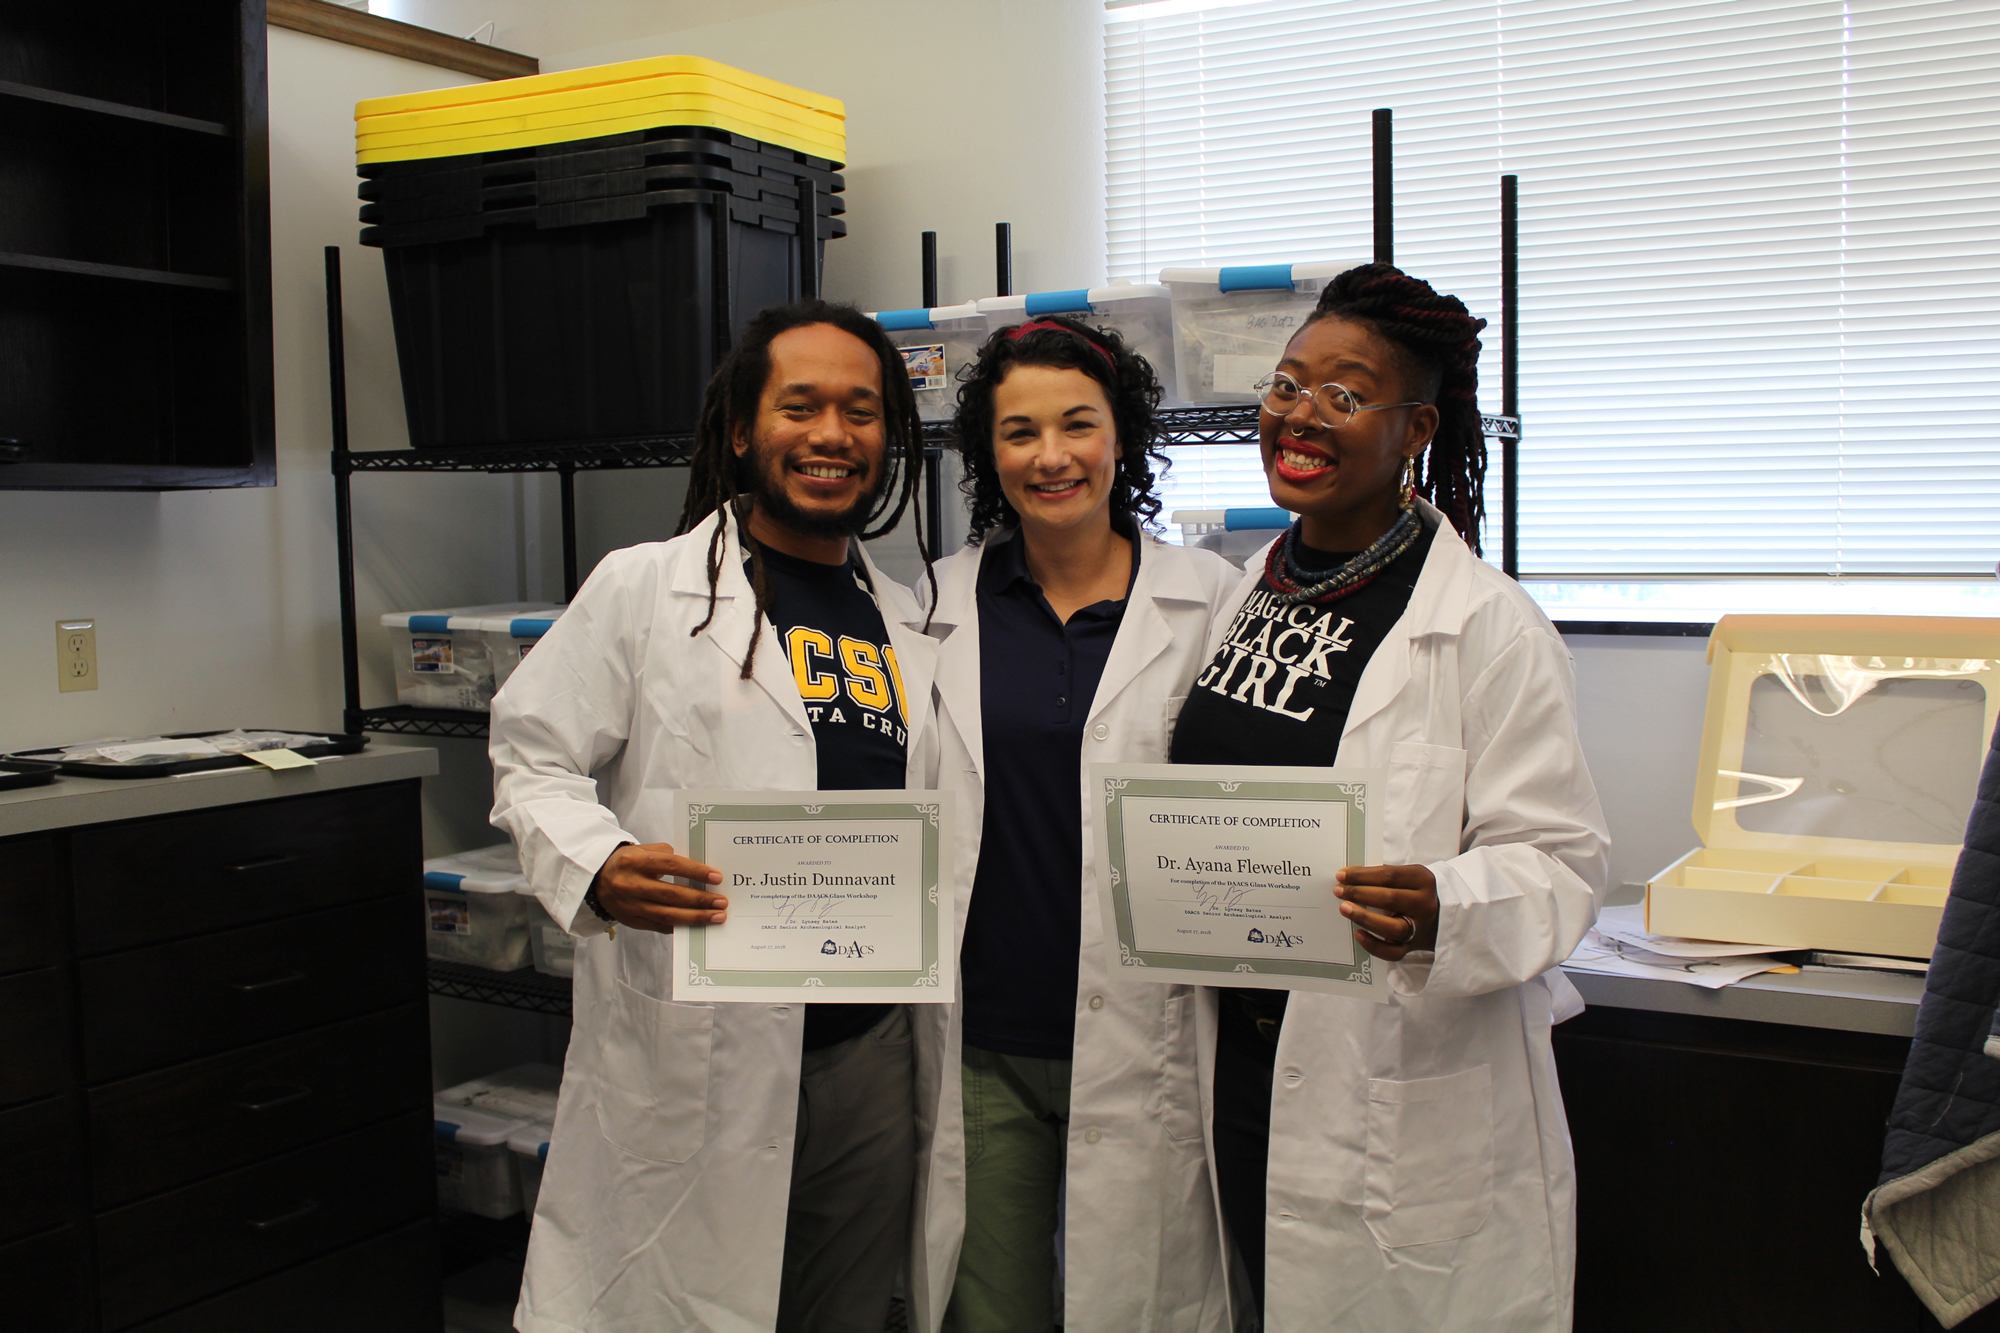 A young African American male, a white woman and an African American nonbinary person hold up certificates while wearing lab coats and smiling